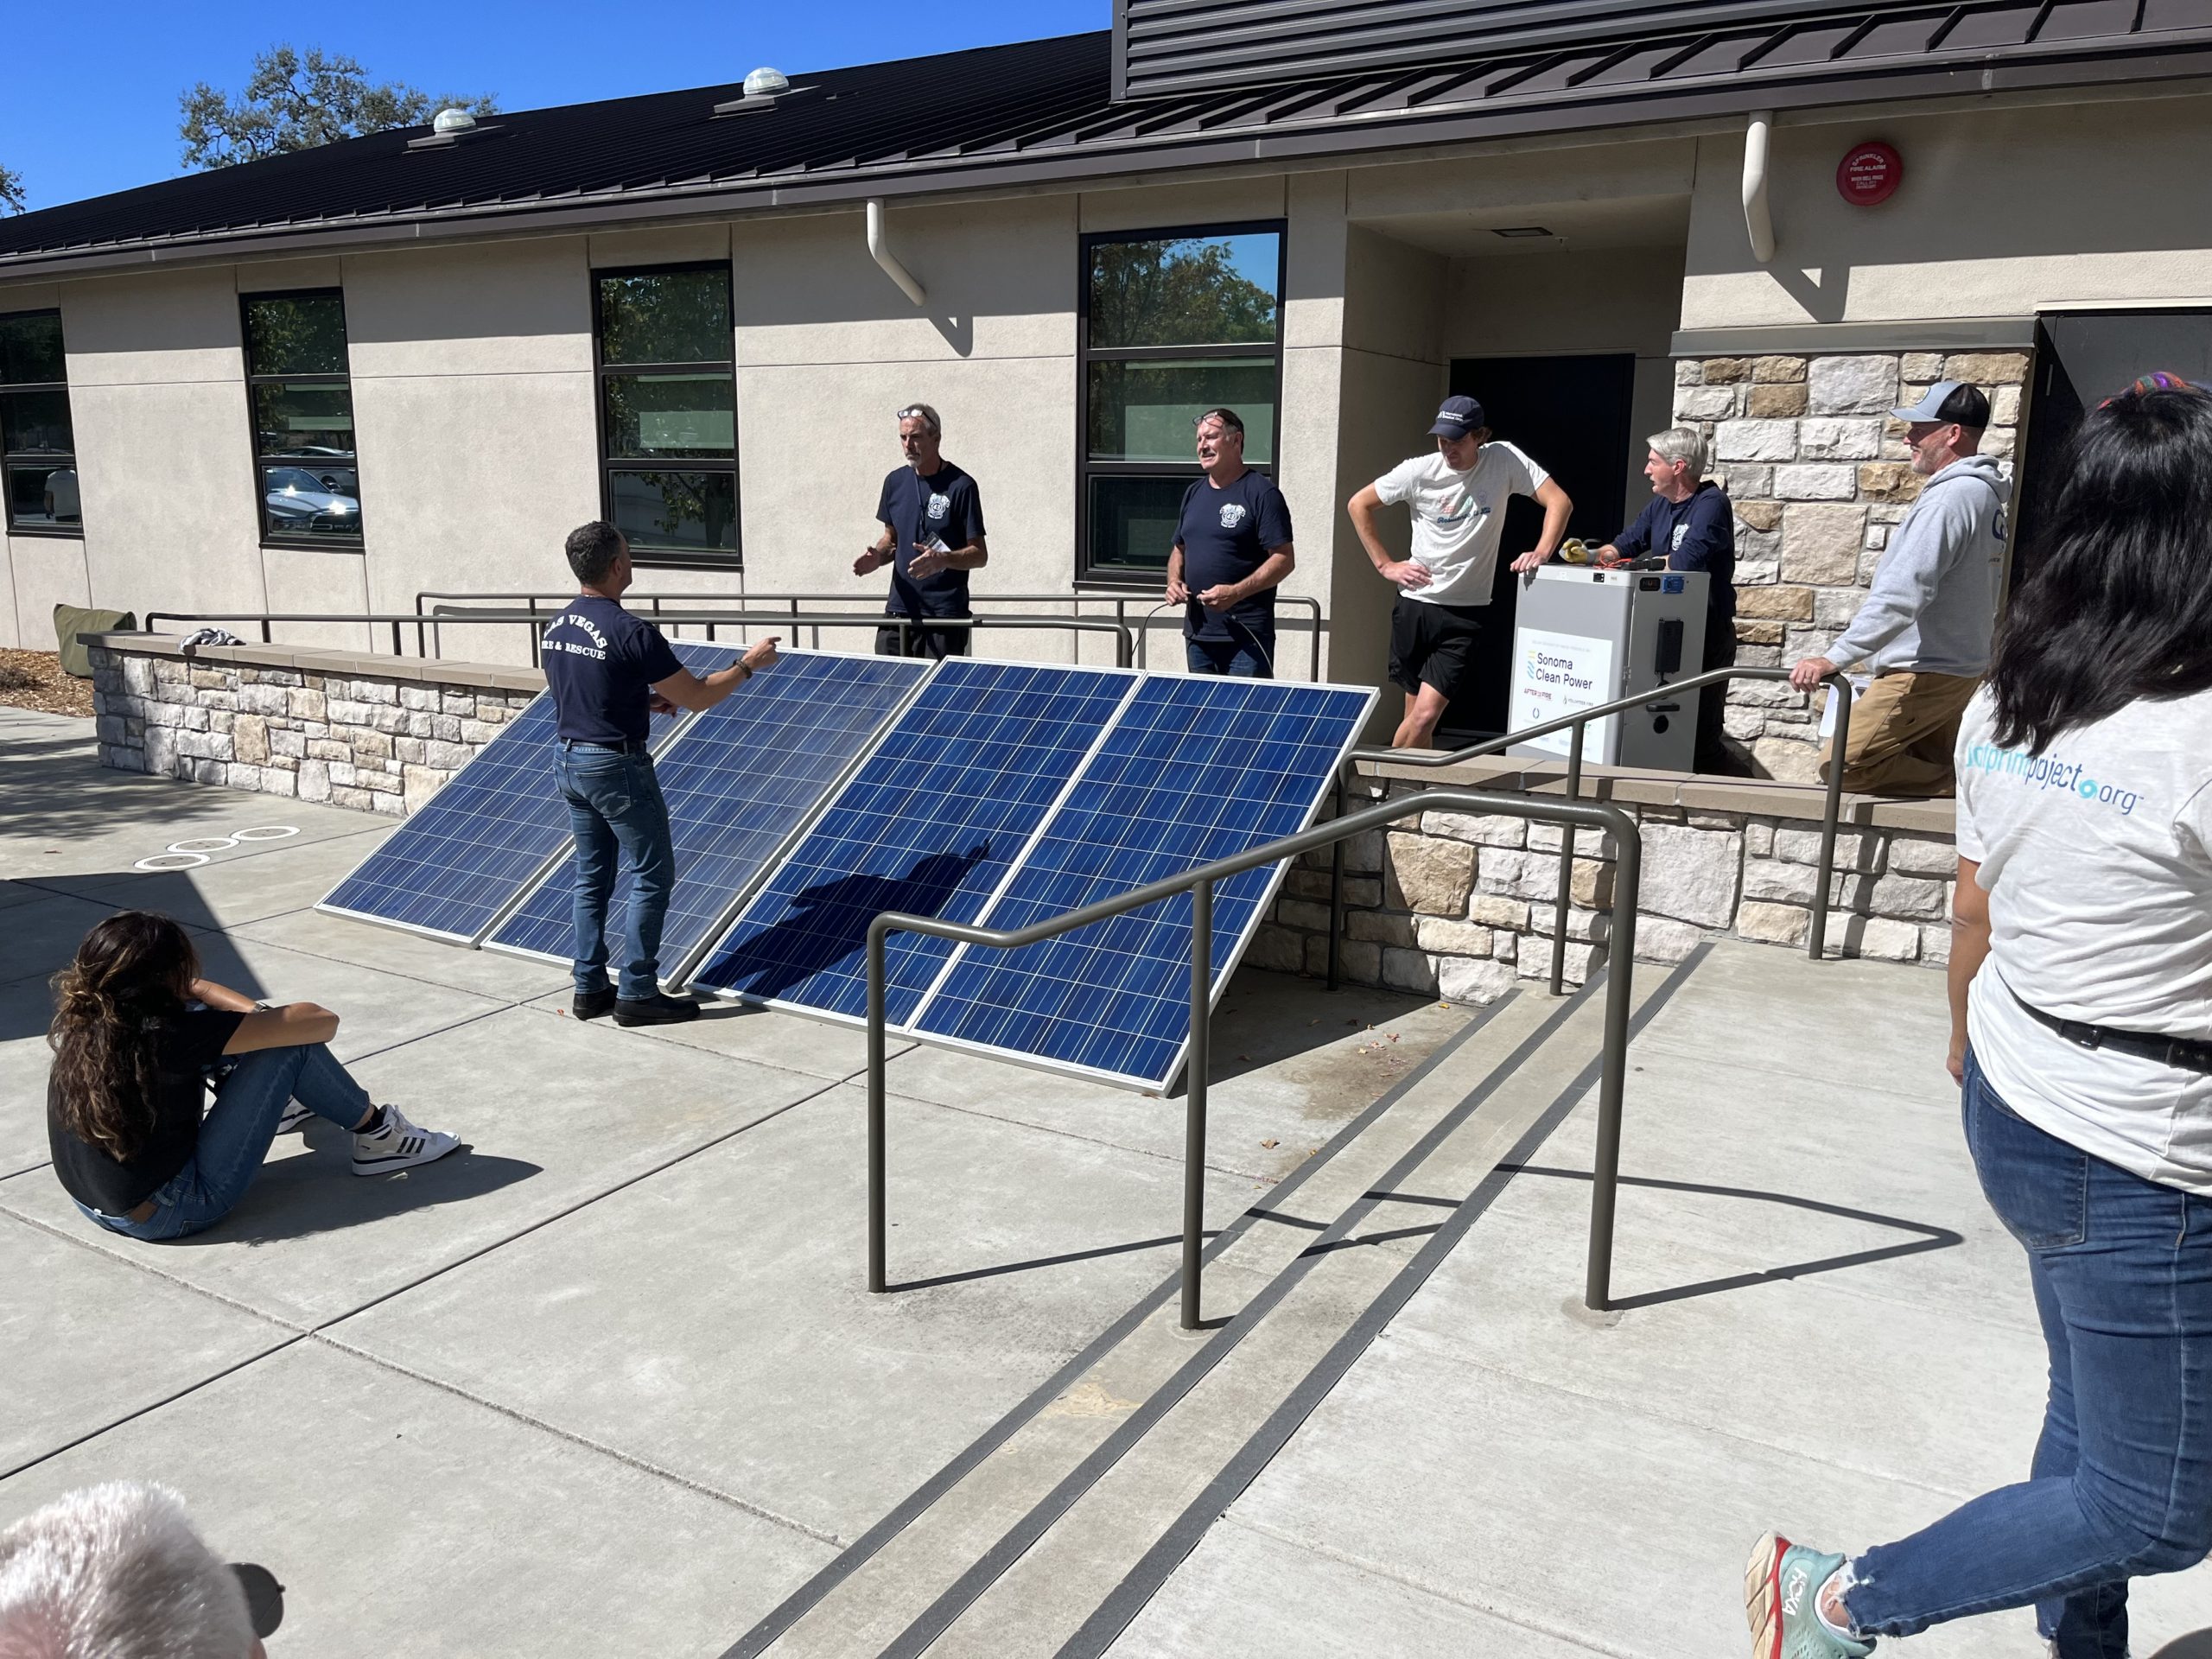 The Footprint Project was on site building three portable solar generators that local volunteer fire departments learned how to build, maintain and use in times of emergency